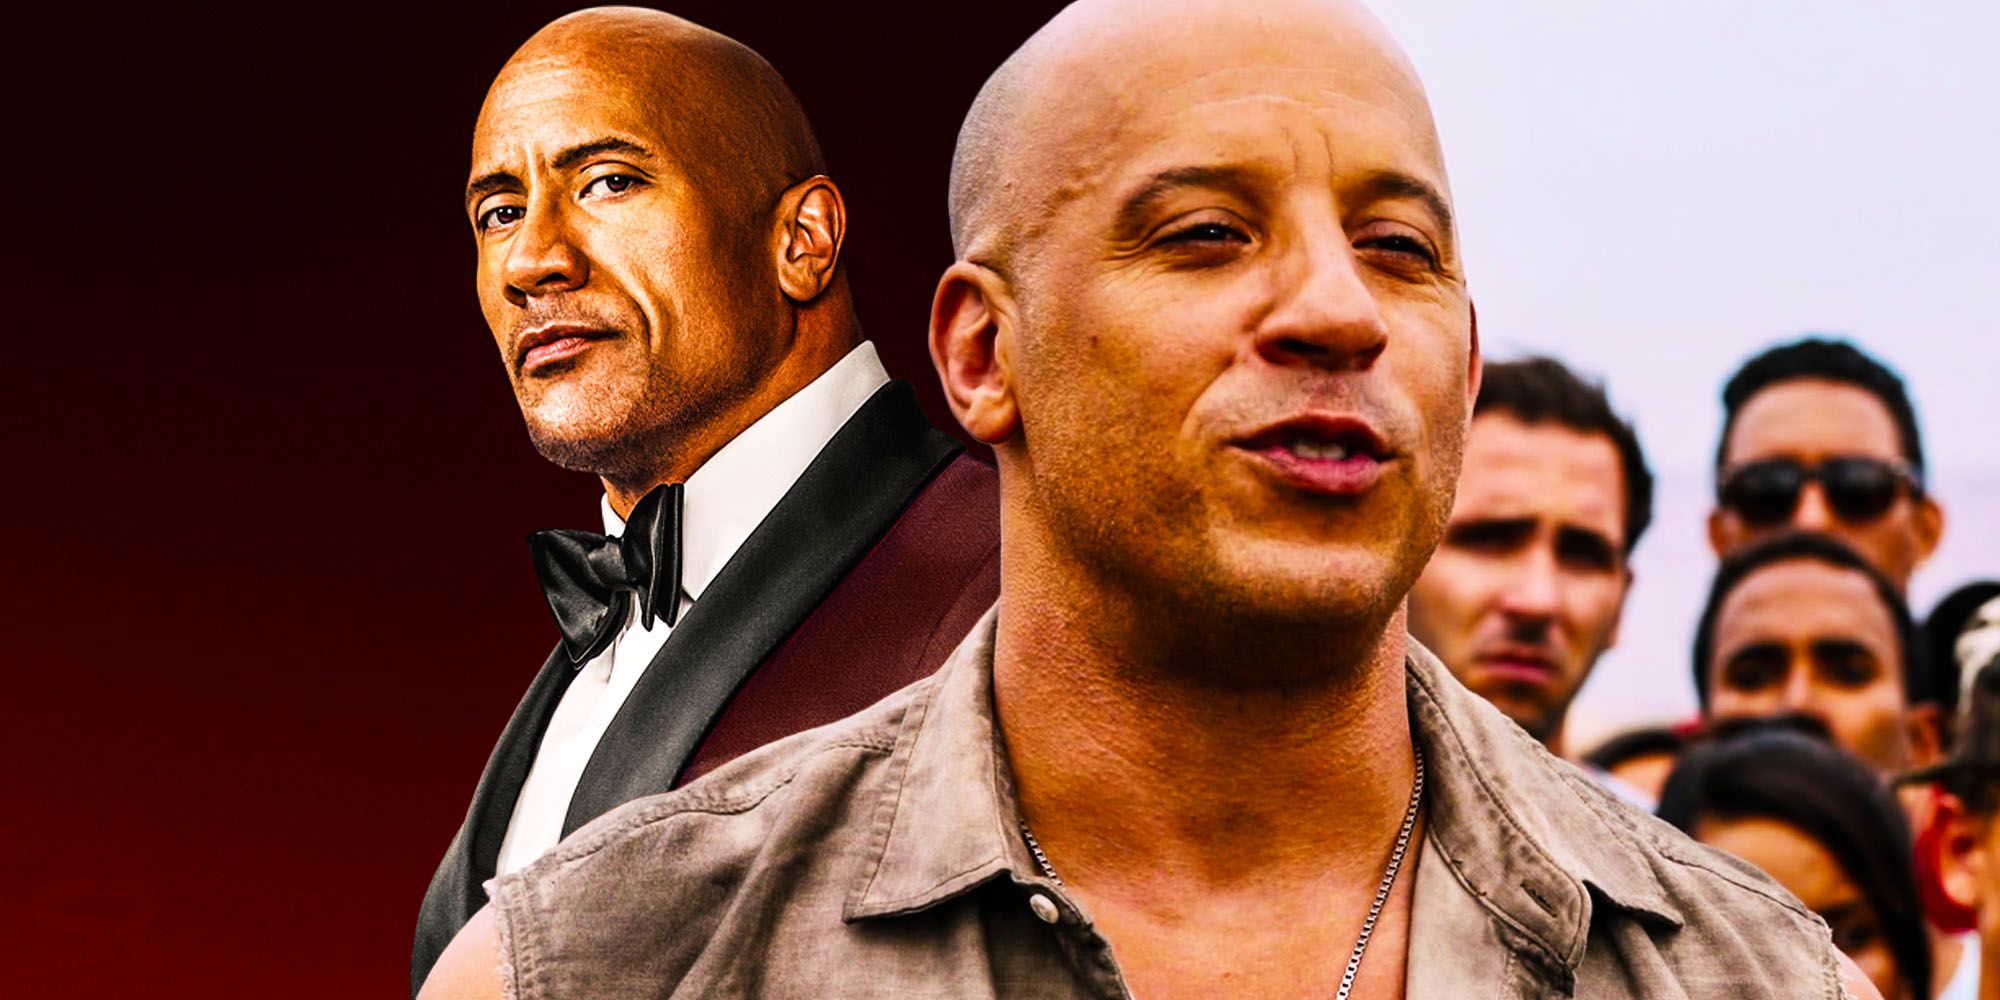 Red notice continues the Rock and Vin Diesel feud